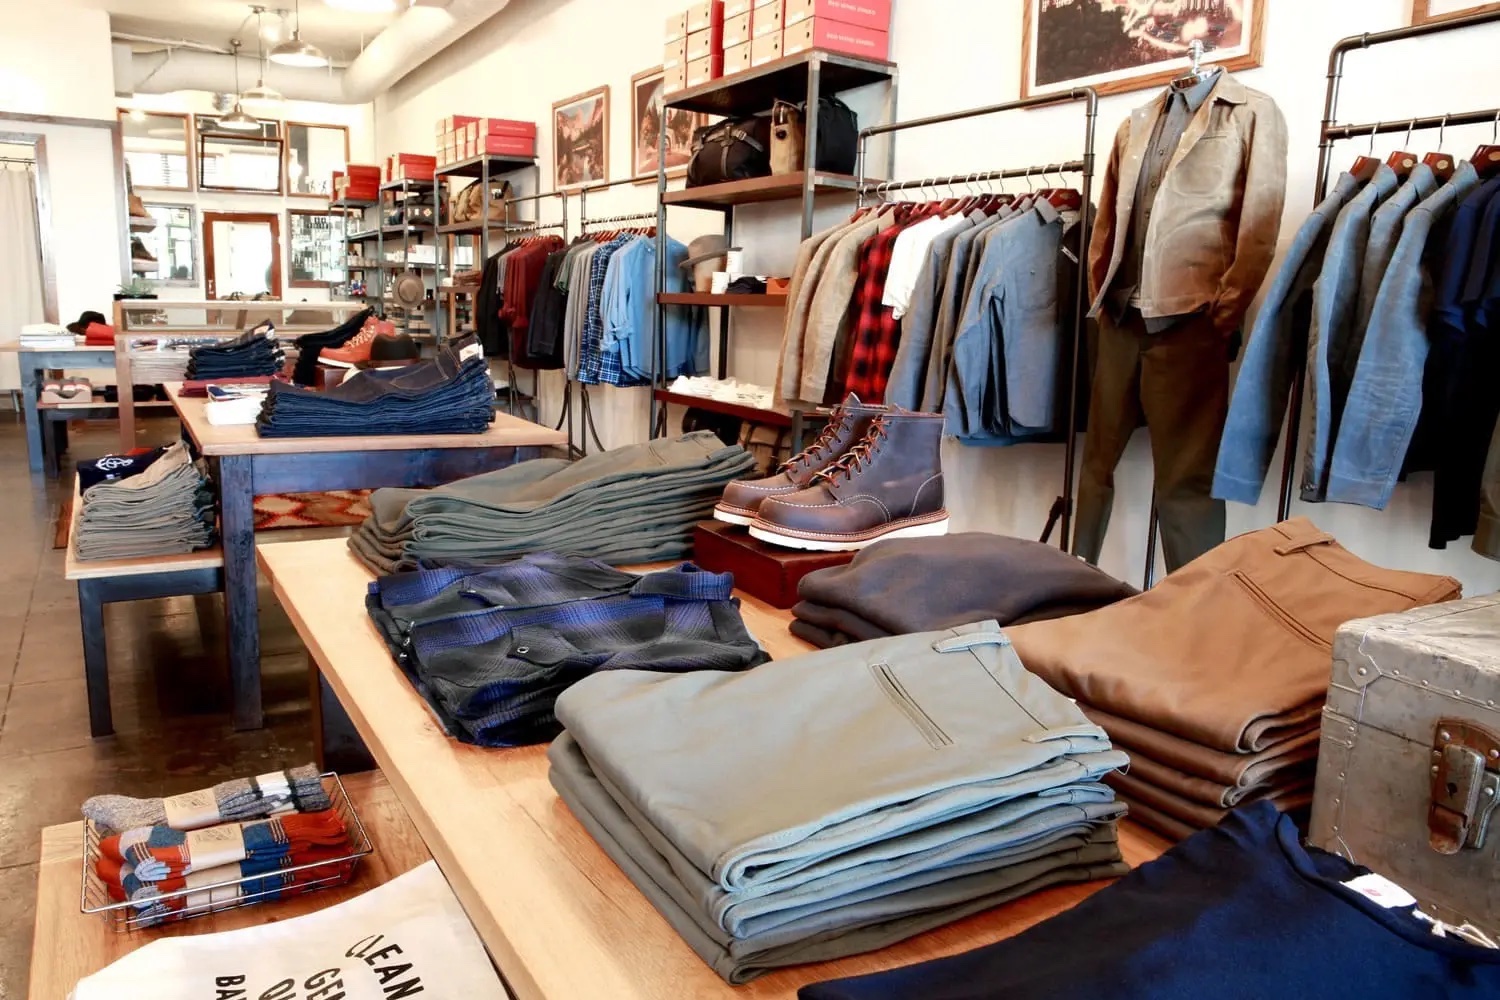 Interior of General Quarters with jeans, shirts and boots folded on display tables with clothes hanging on a rack behind them